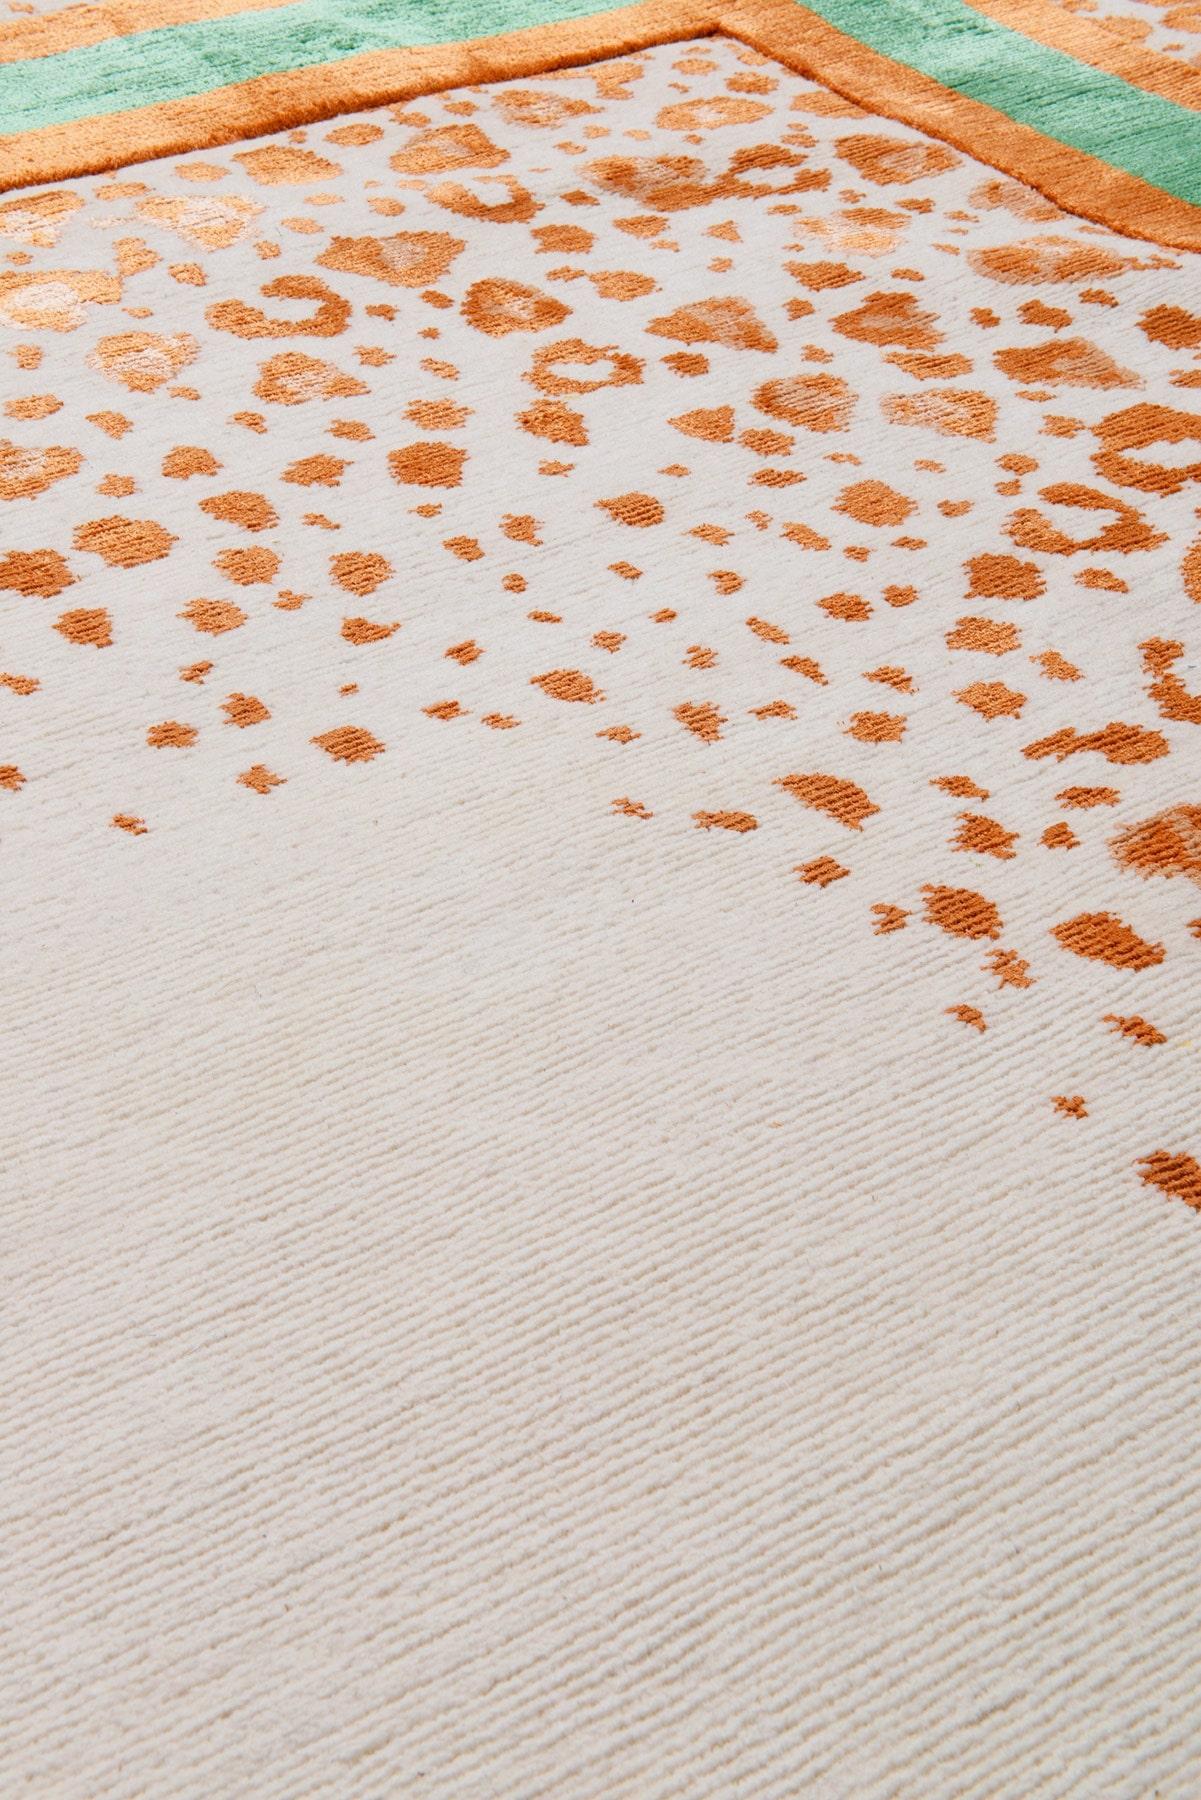 In striking green and orange hues, Panthera features a bricolage of delicate silk animal prints, which freckle over the woollen base. With a nod to ancient mythology, this multifaceted design incites intrigue and a sense of tamed revelry.
.  